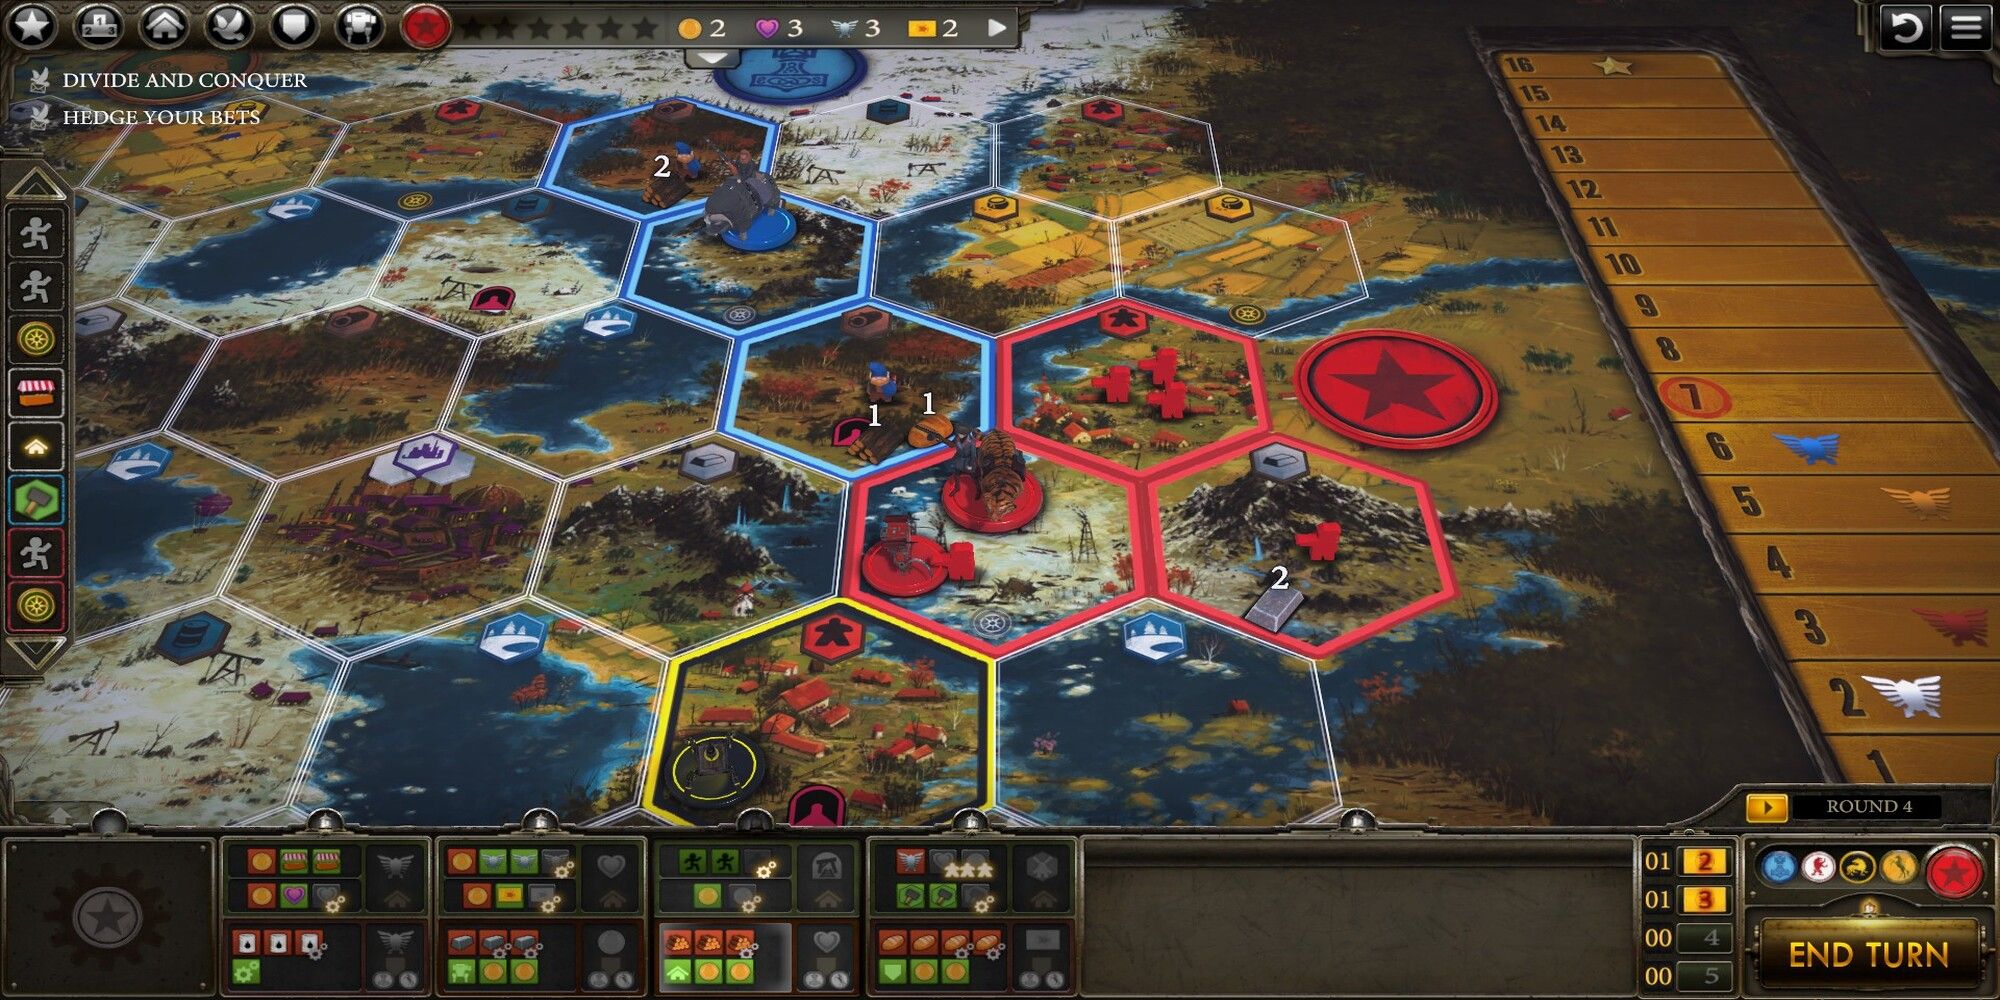 In-Game Screenshot From Scythe Digital Edition showing the tiles and map screen where you can choose various options